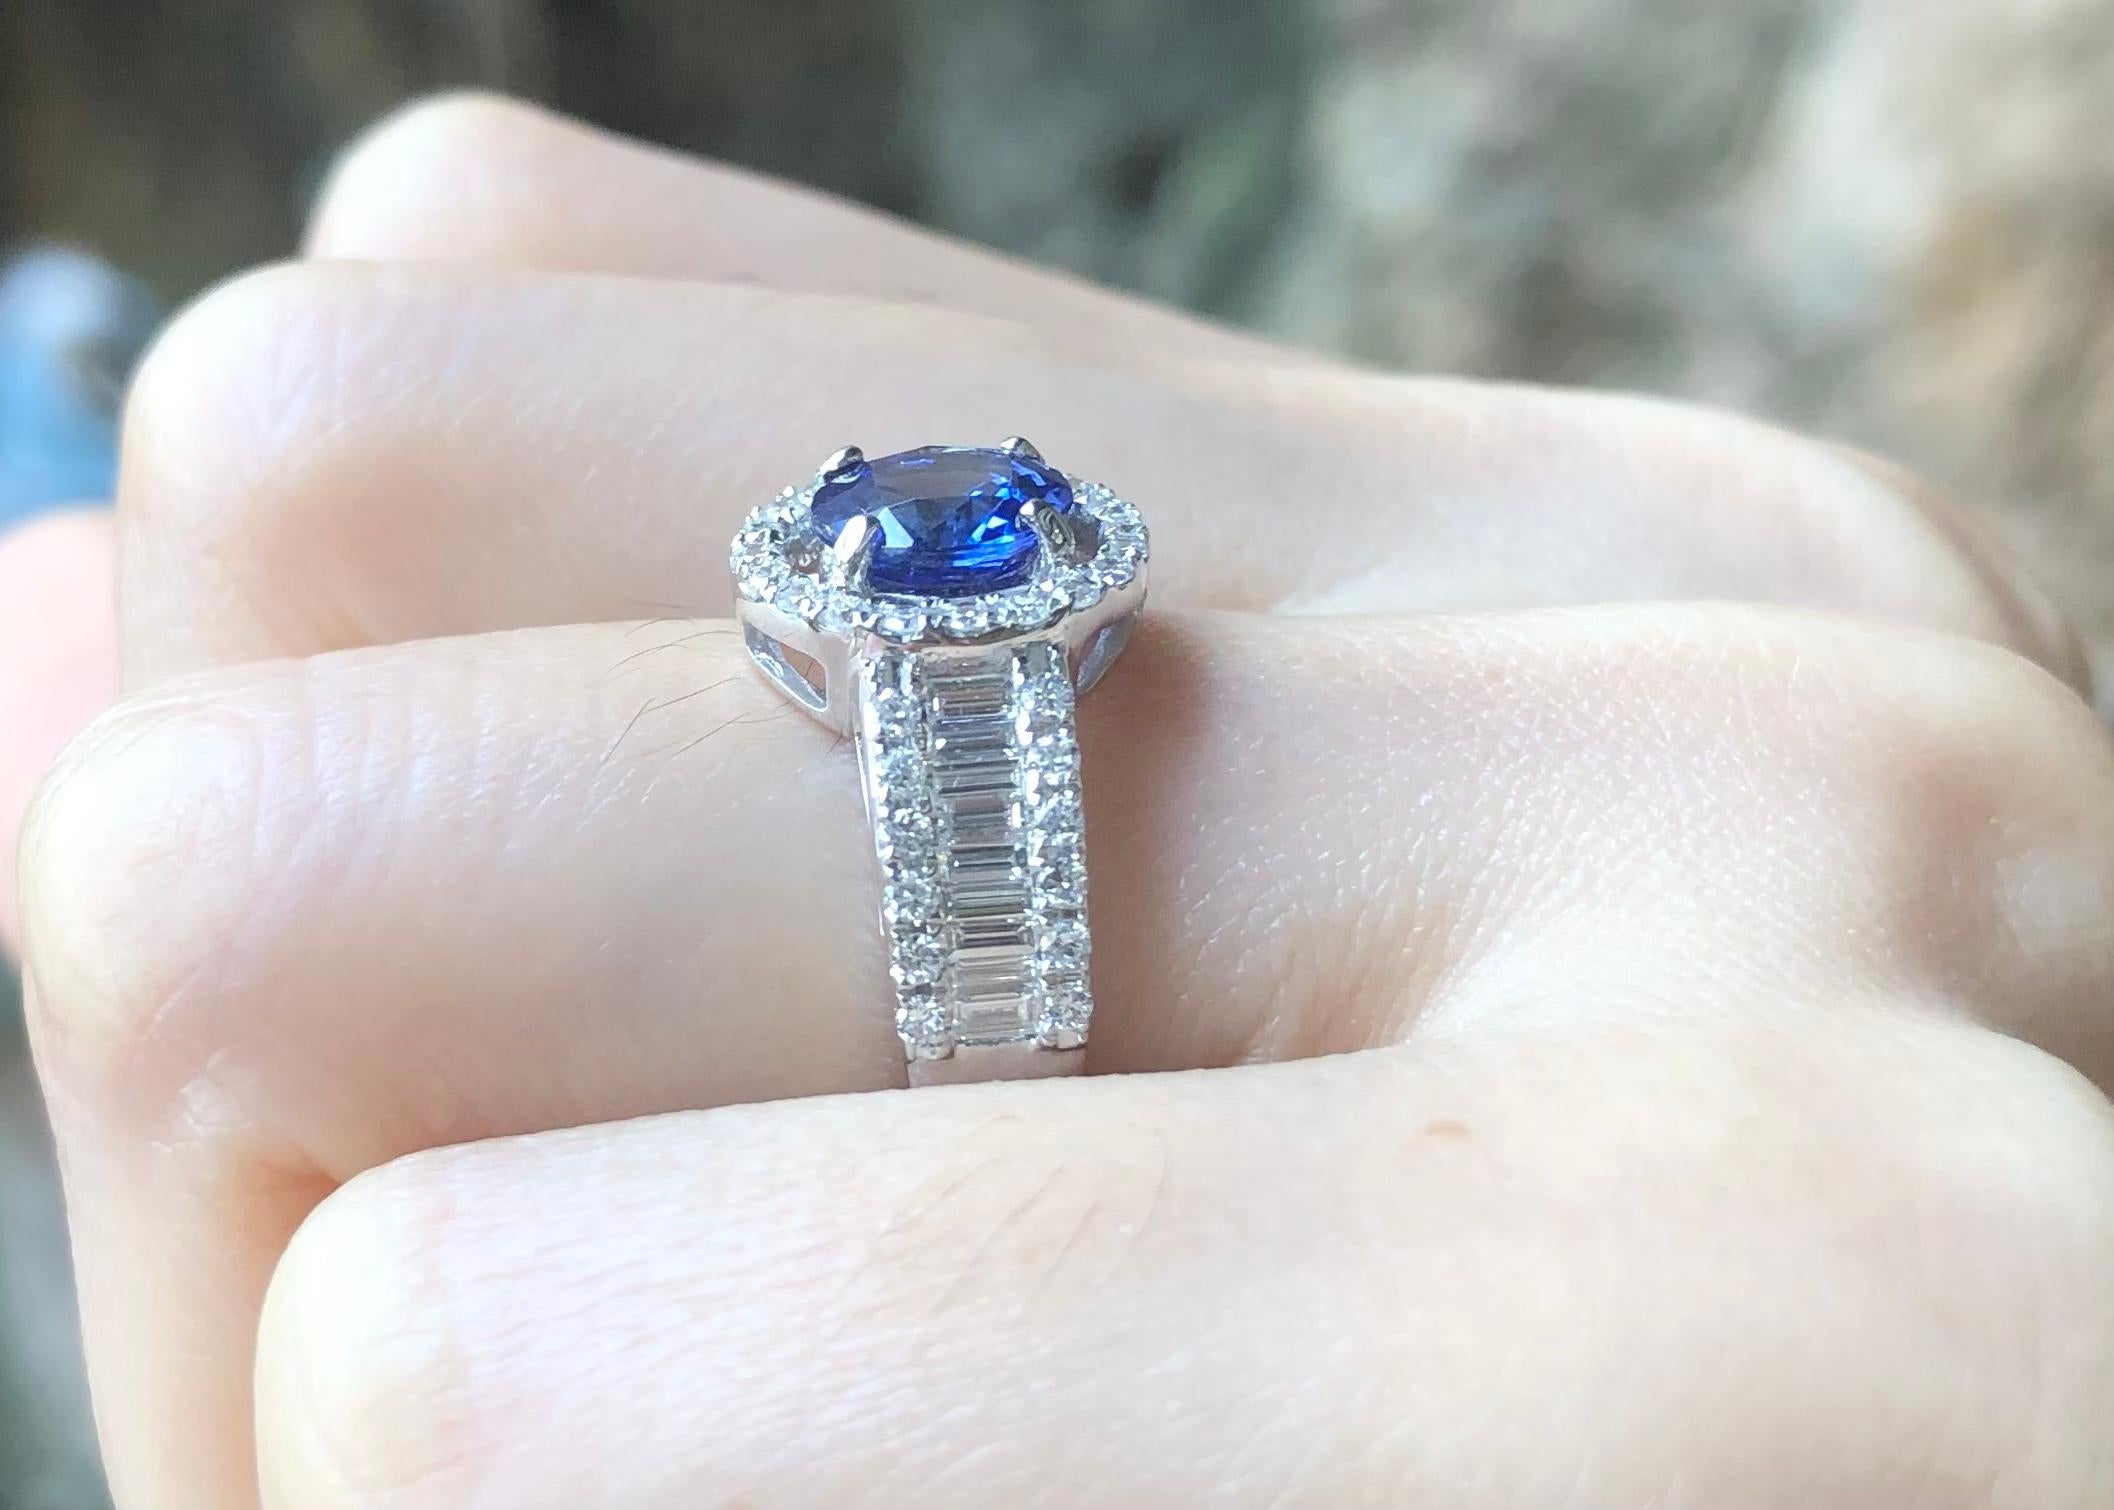 Tanzanite 1.31 carats with Diamond 0.84 carat Ring set in 18K White Gold Settings

Width:  1.2 cm 
Length: 1.2 cm
Ring Size: 49
Total Weight: 4.6 grams

